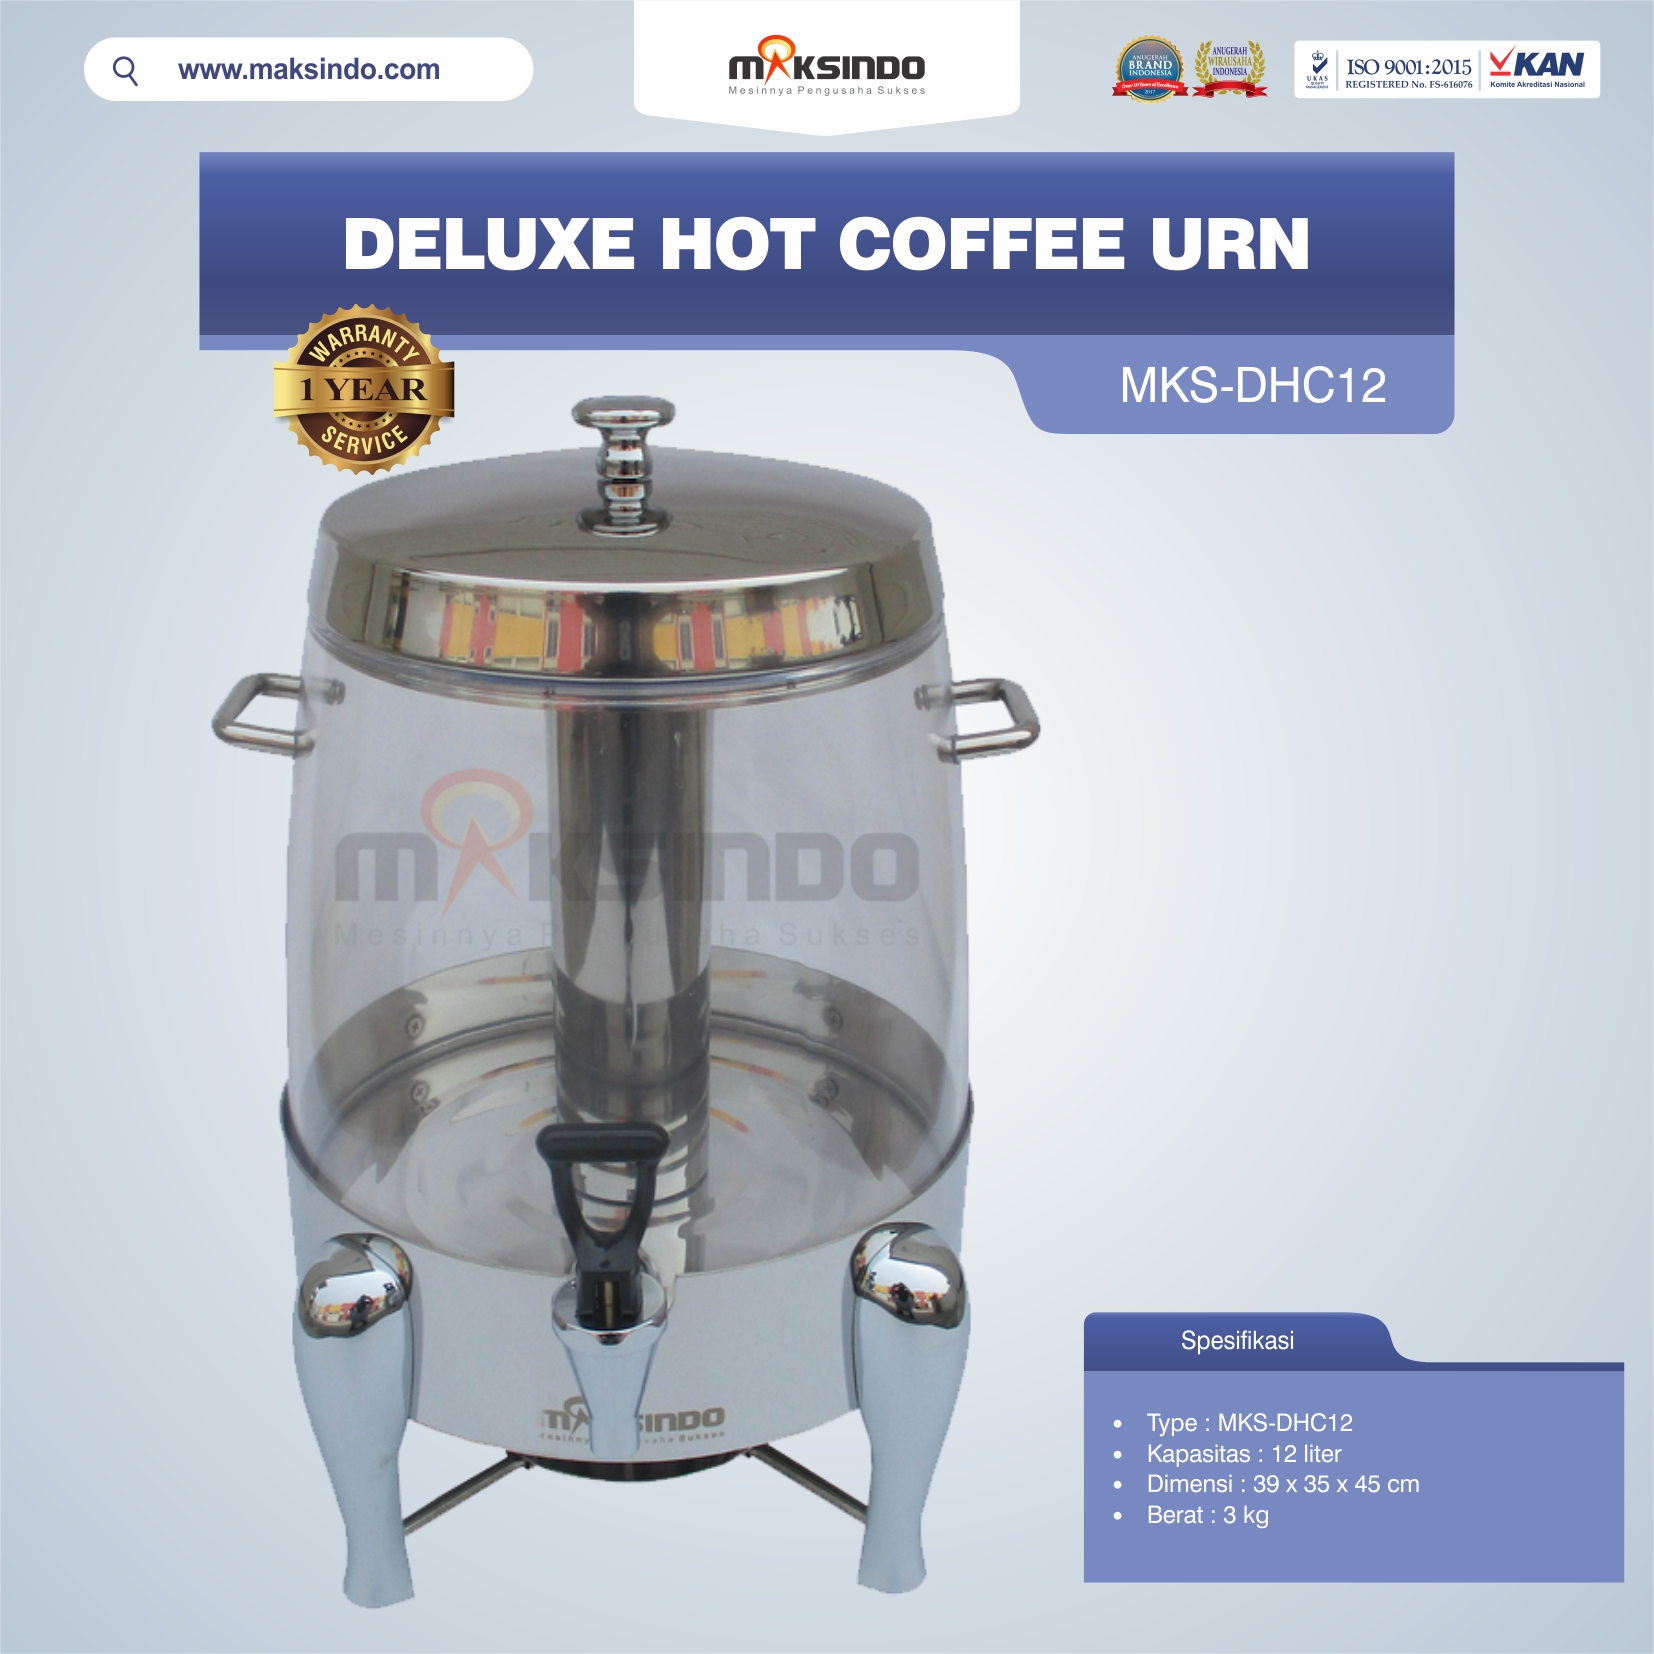 Deluxe Hot Coffee Urn MKS-DHC12